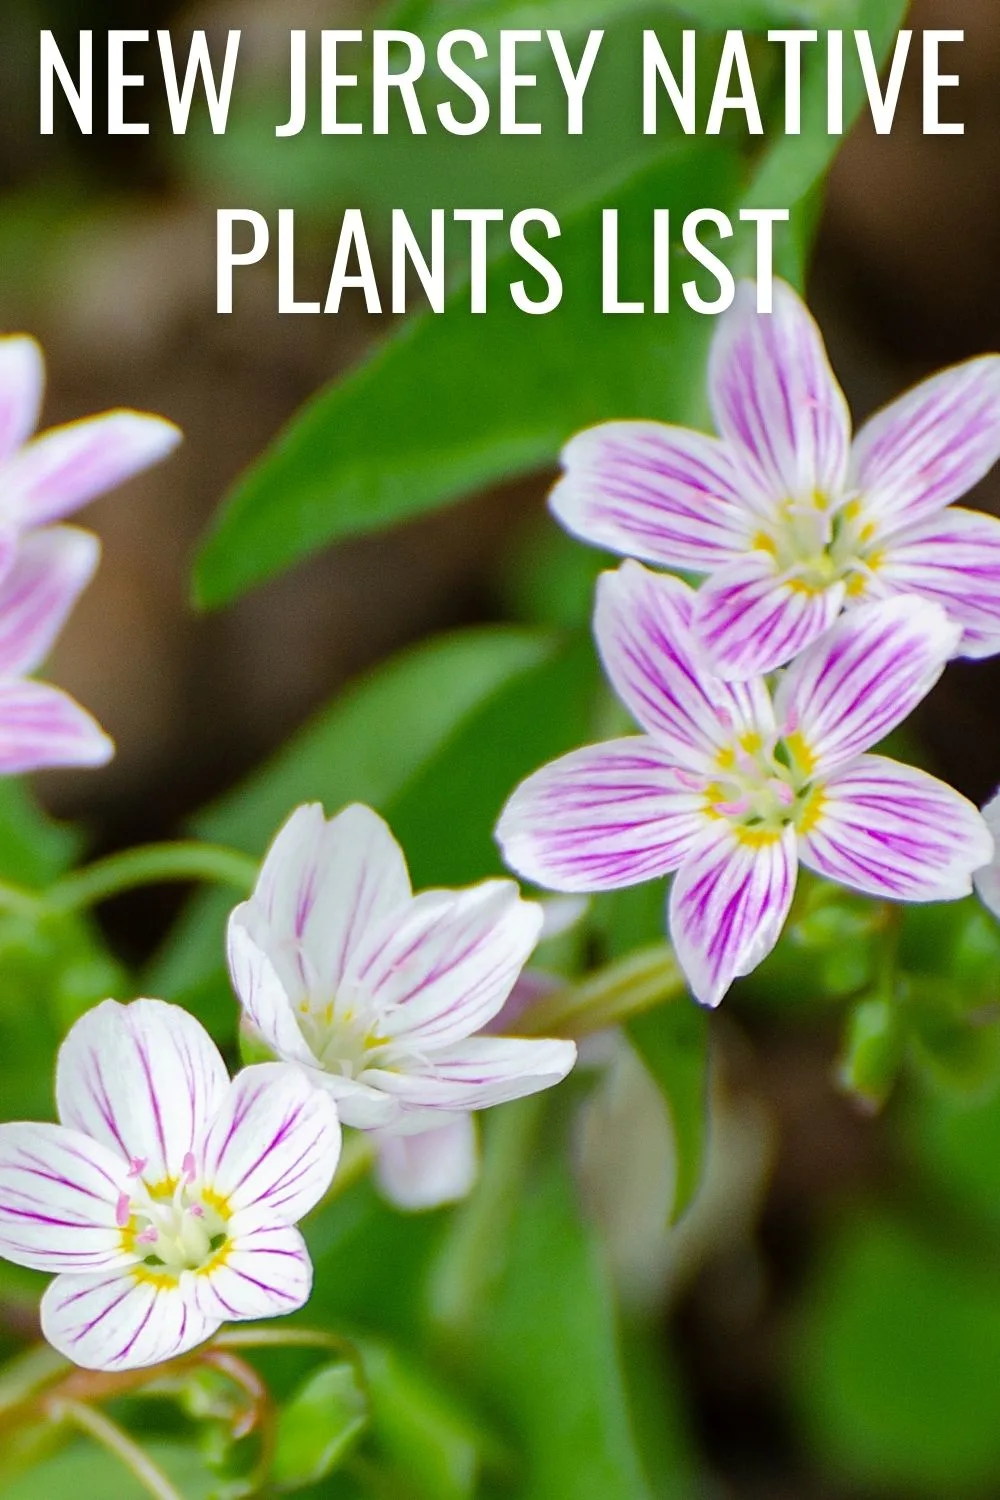 New Jersey Native Plants List: 15 Amazing Garden State Choices